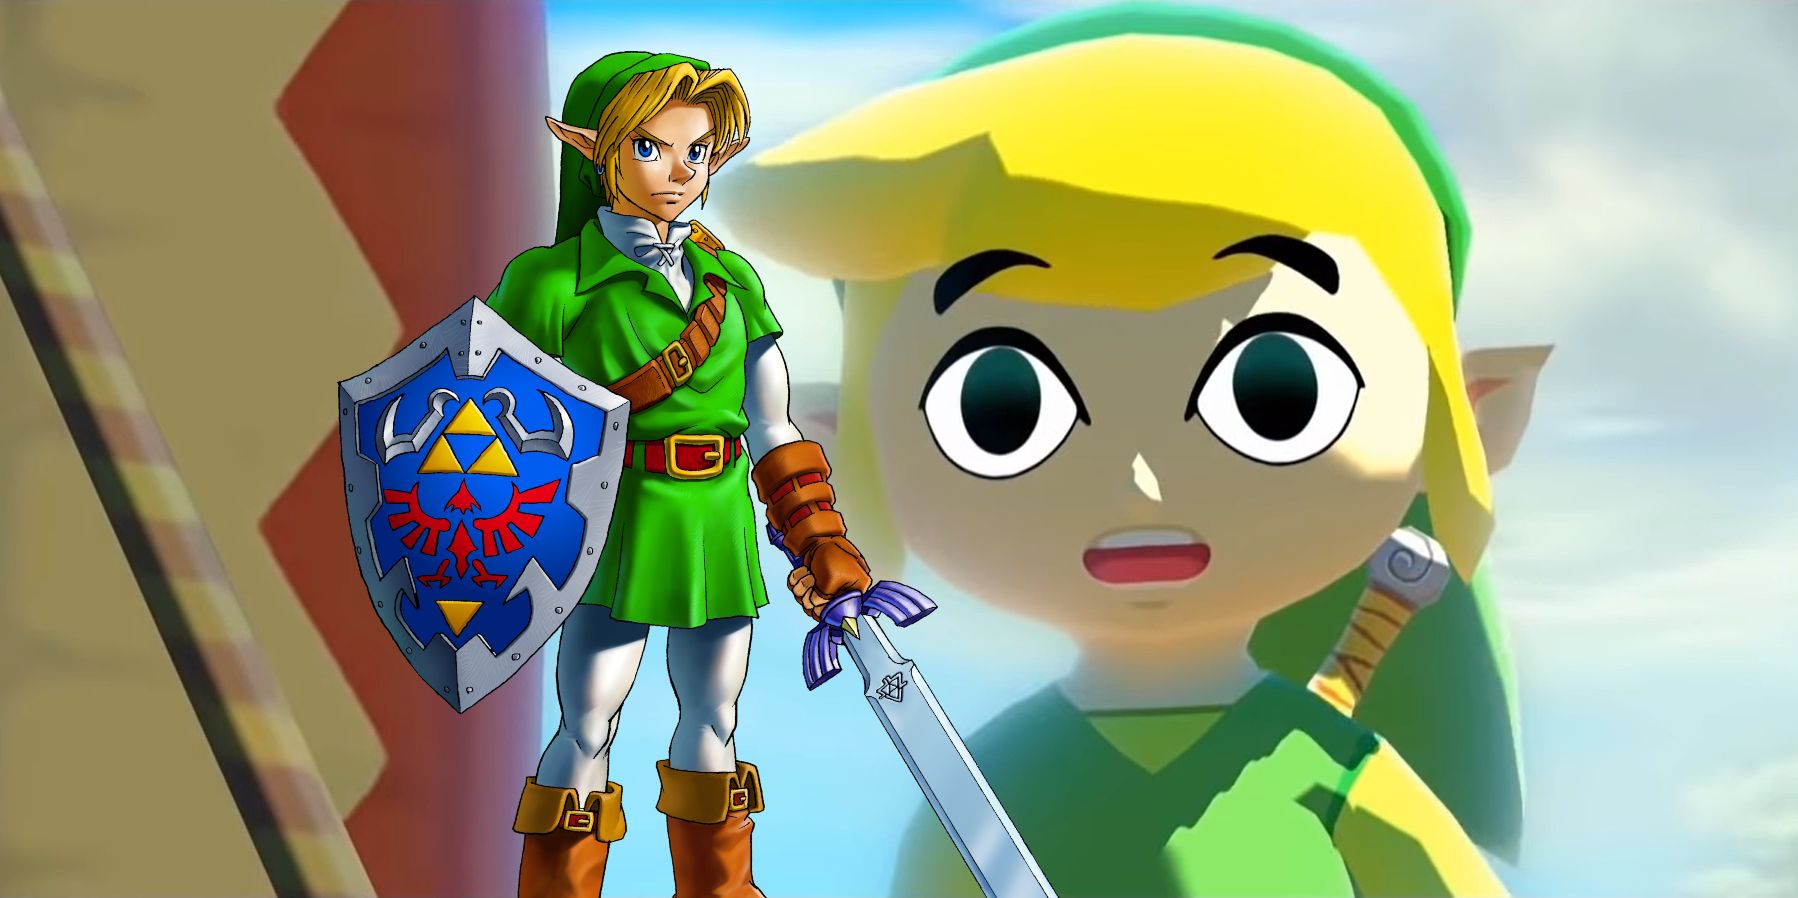 Zelda Timeline Explained Why Link Is A Child In The Adult Era